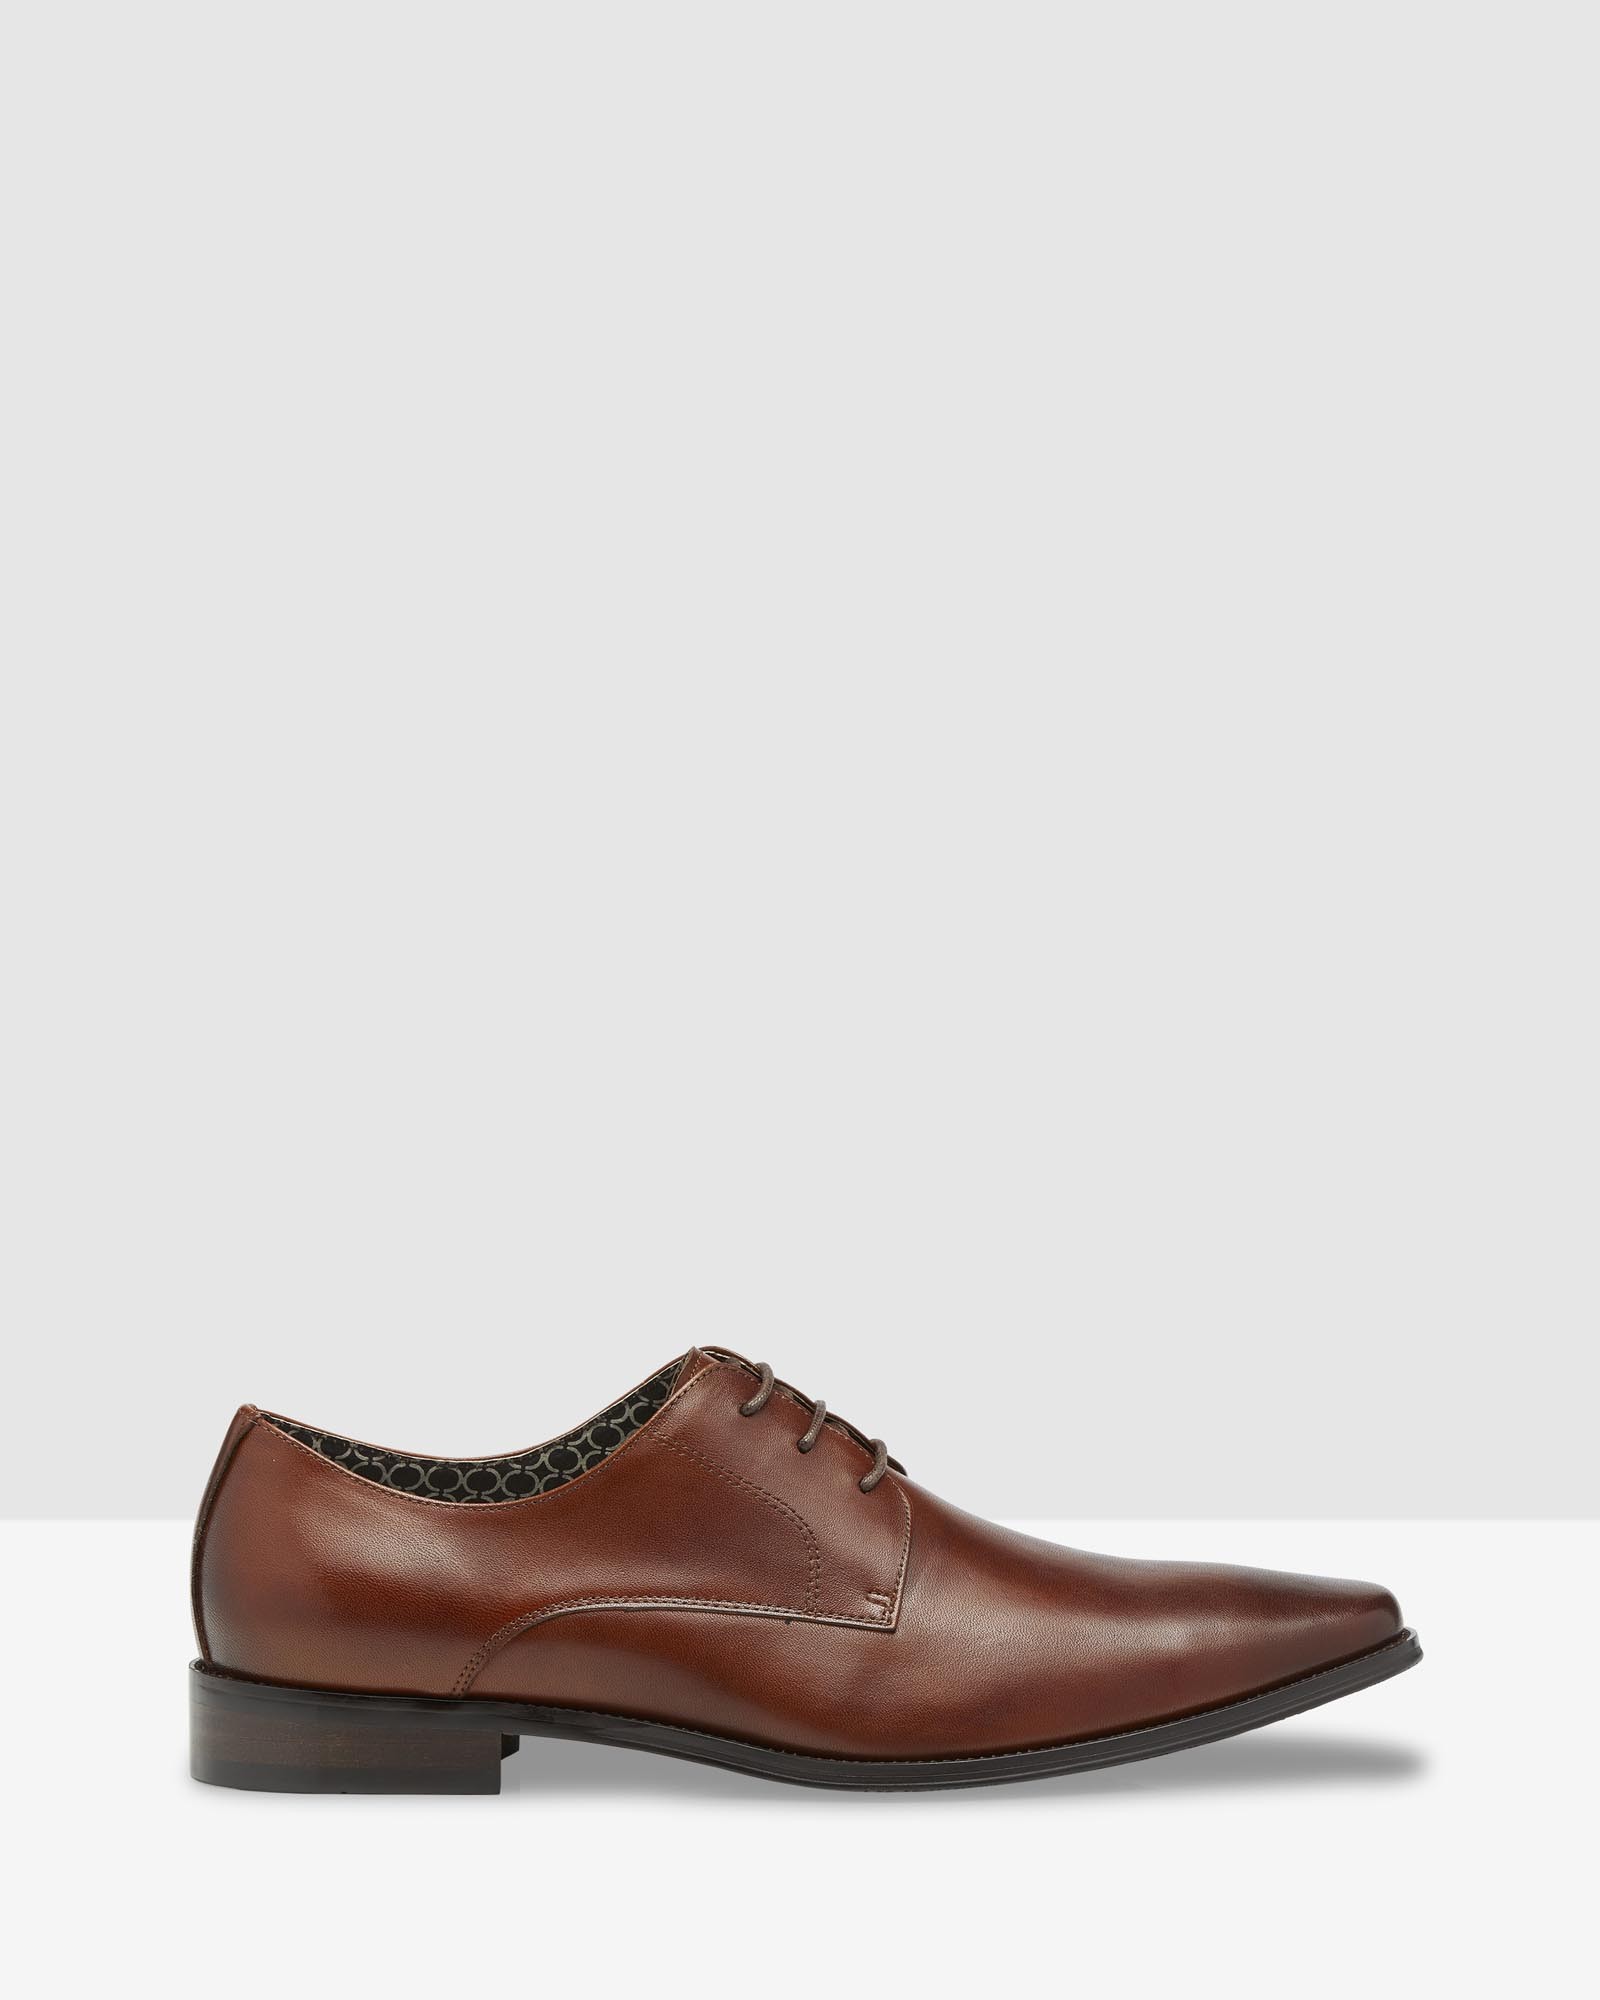 Aiden Darby Shoes Tan by Oxford | ShoeSales